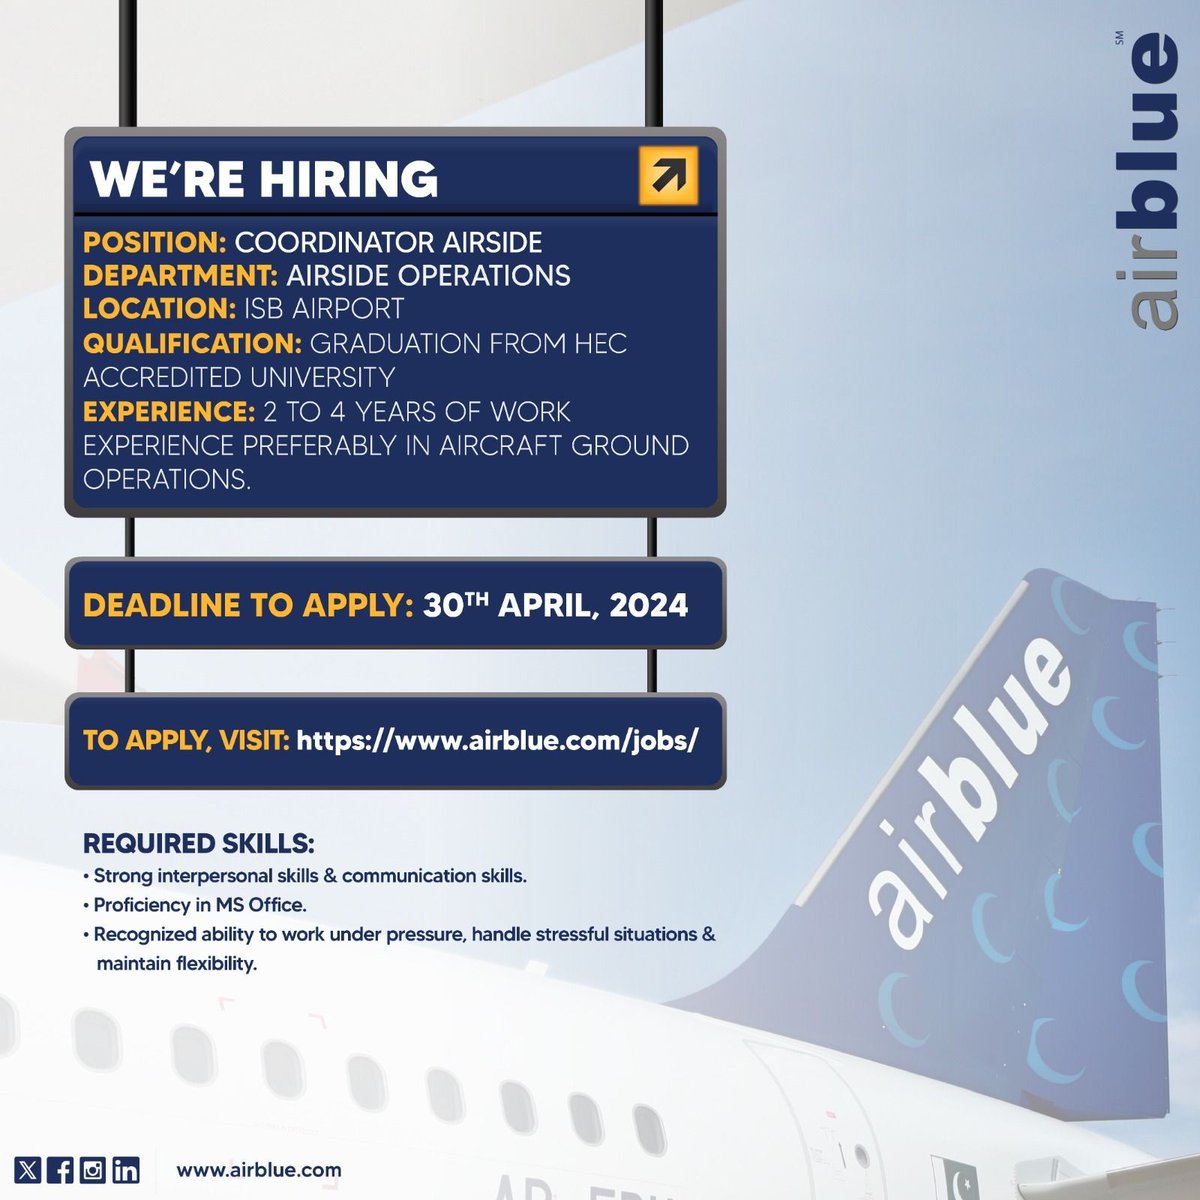 This is your chance to join our team. Position: Coordinator Airside Location: Islamabad Deadline: 30th April 2024 To apply, visit: airblue.com/jobs/ #airblue #hiringalert #airbluejobs #hiringnow